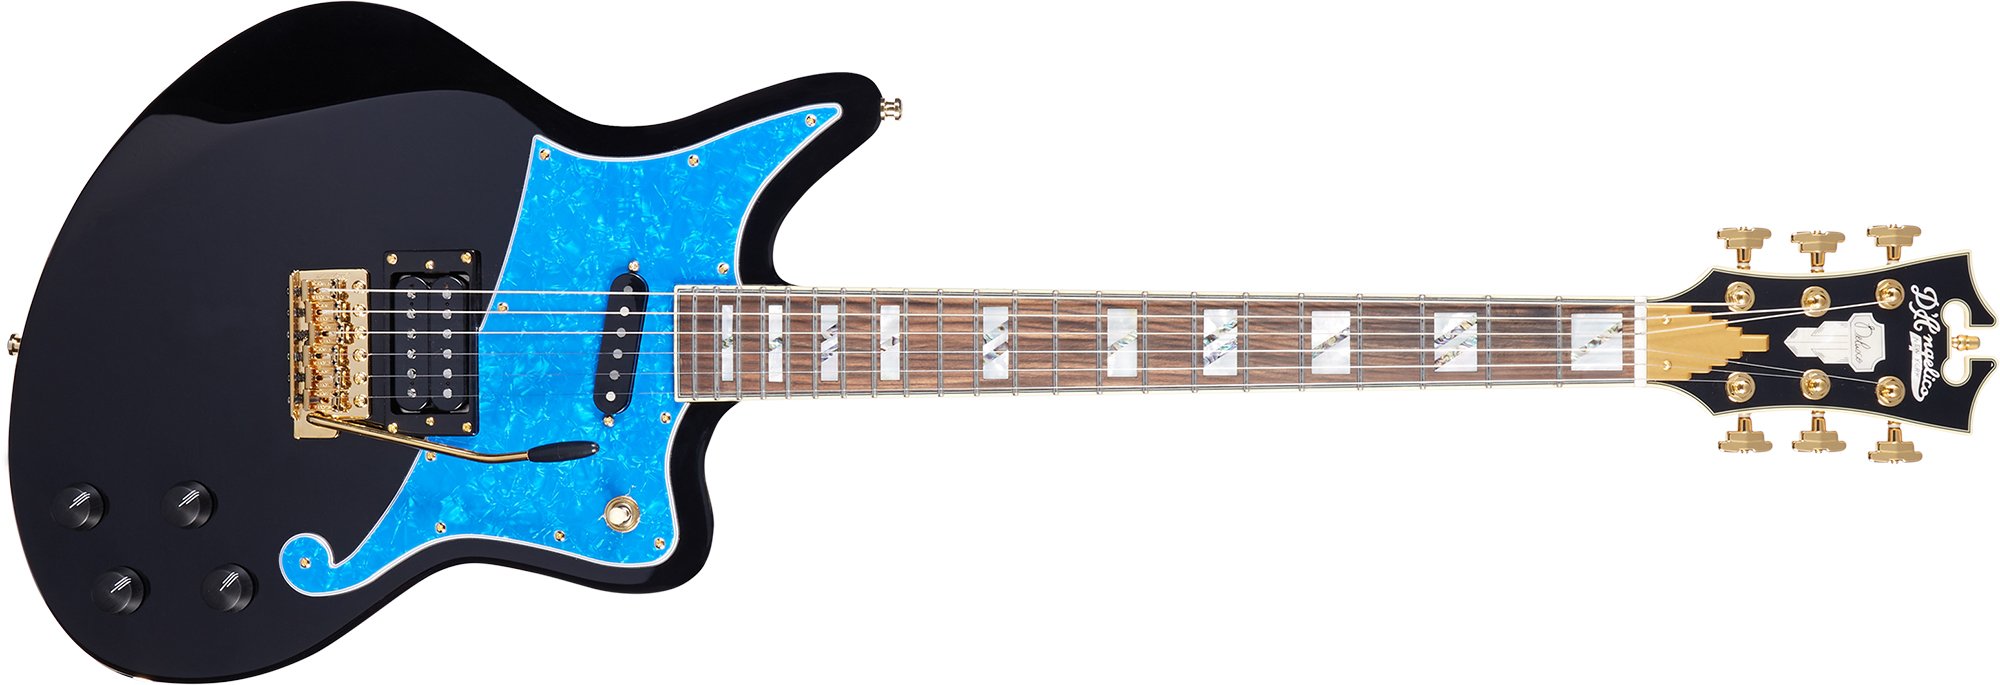 Deluxe Bedford Black with Blue Pearl Pickguard and Tremolo